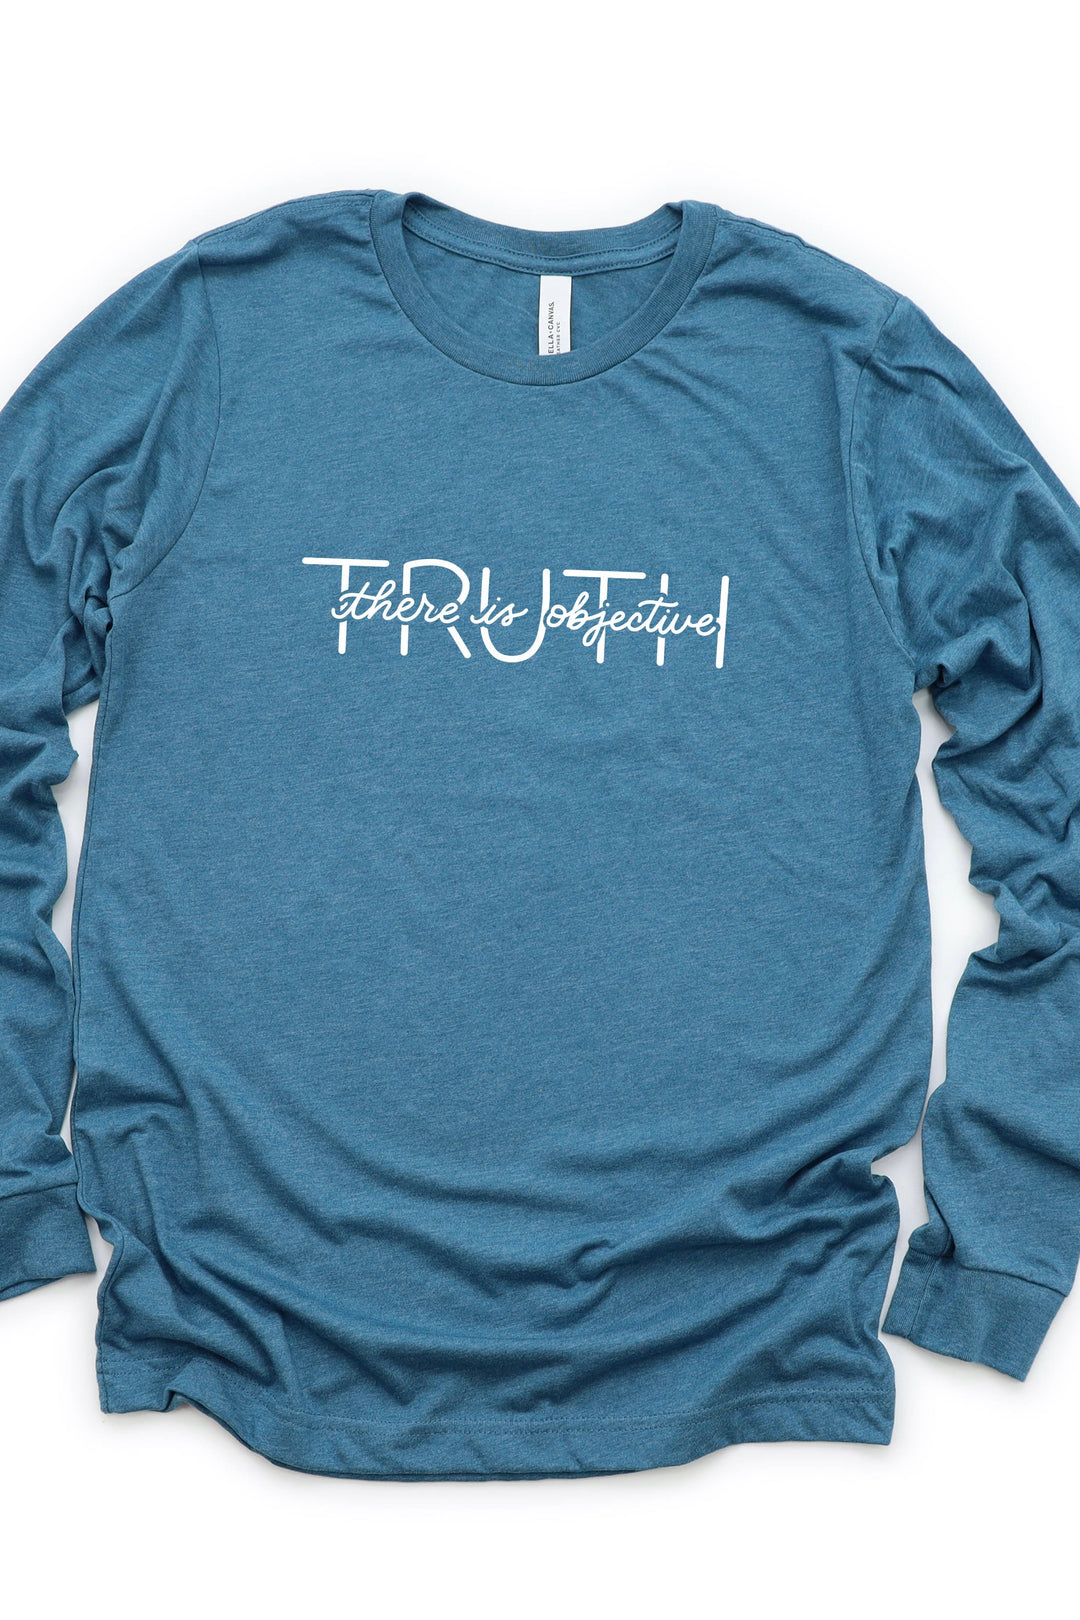 "There Is Objective Truth" Long Sleeve Tee